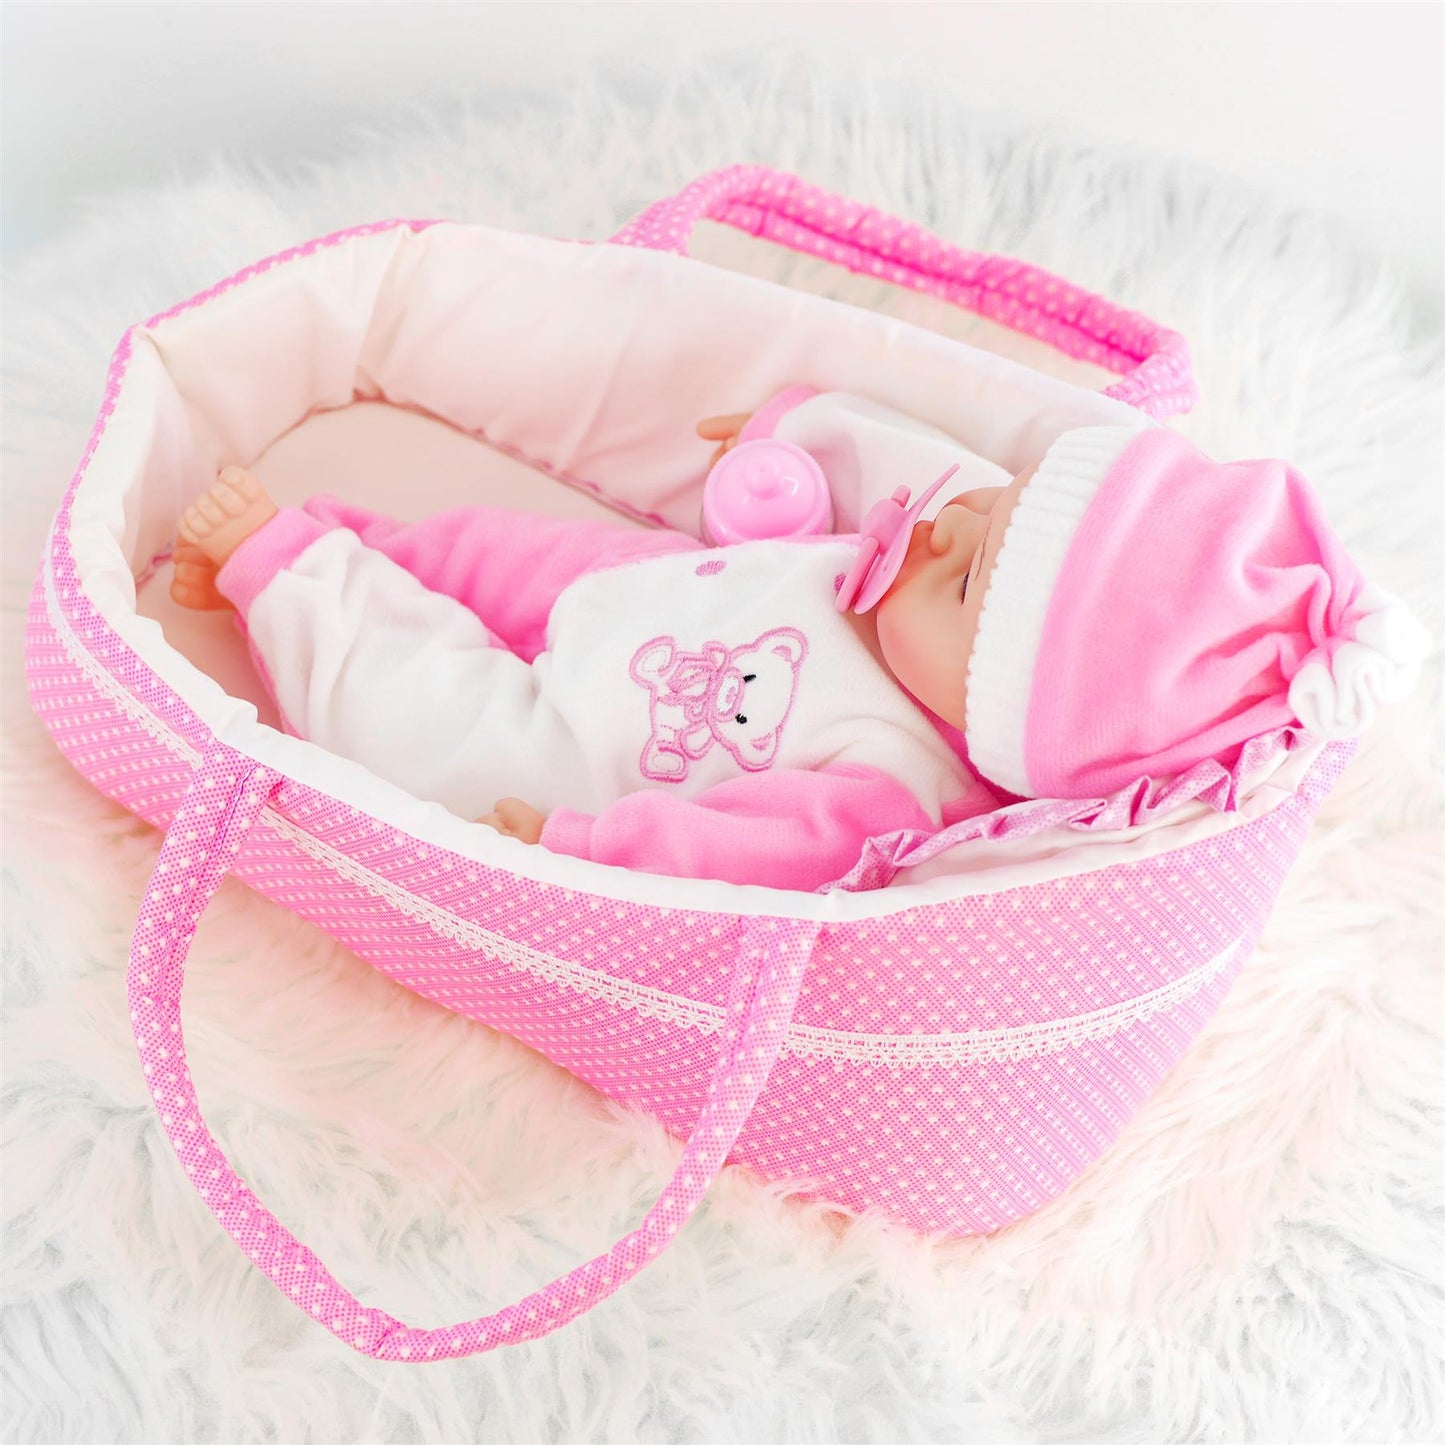 Pink Baby Dolls Carry Cot Bed by The Magic Toy Shop - UKBuyZone